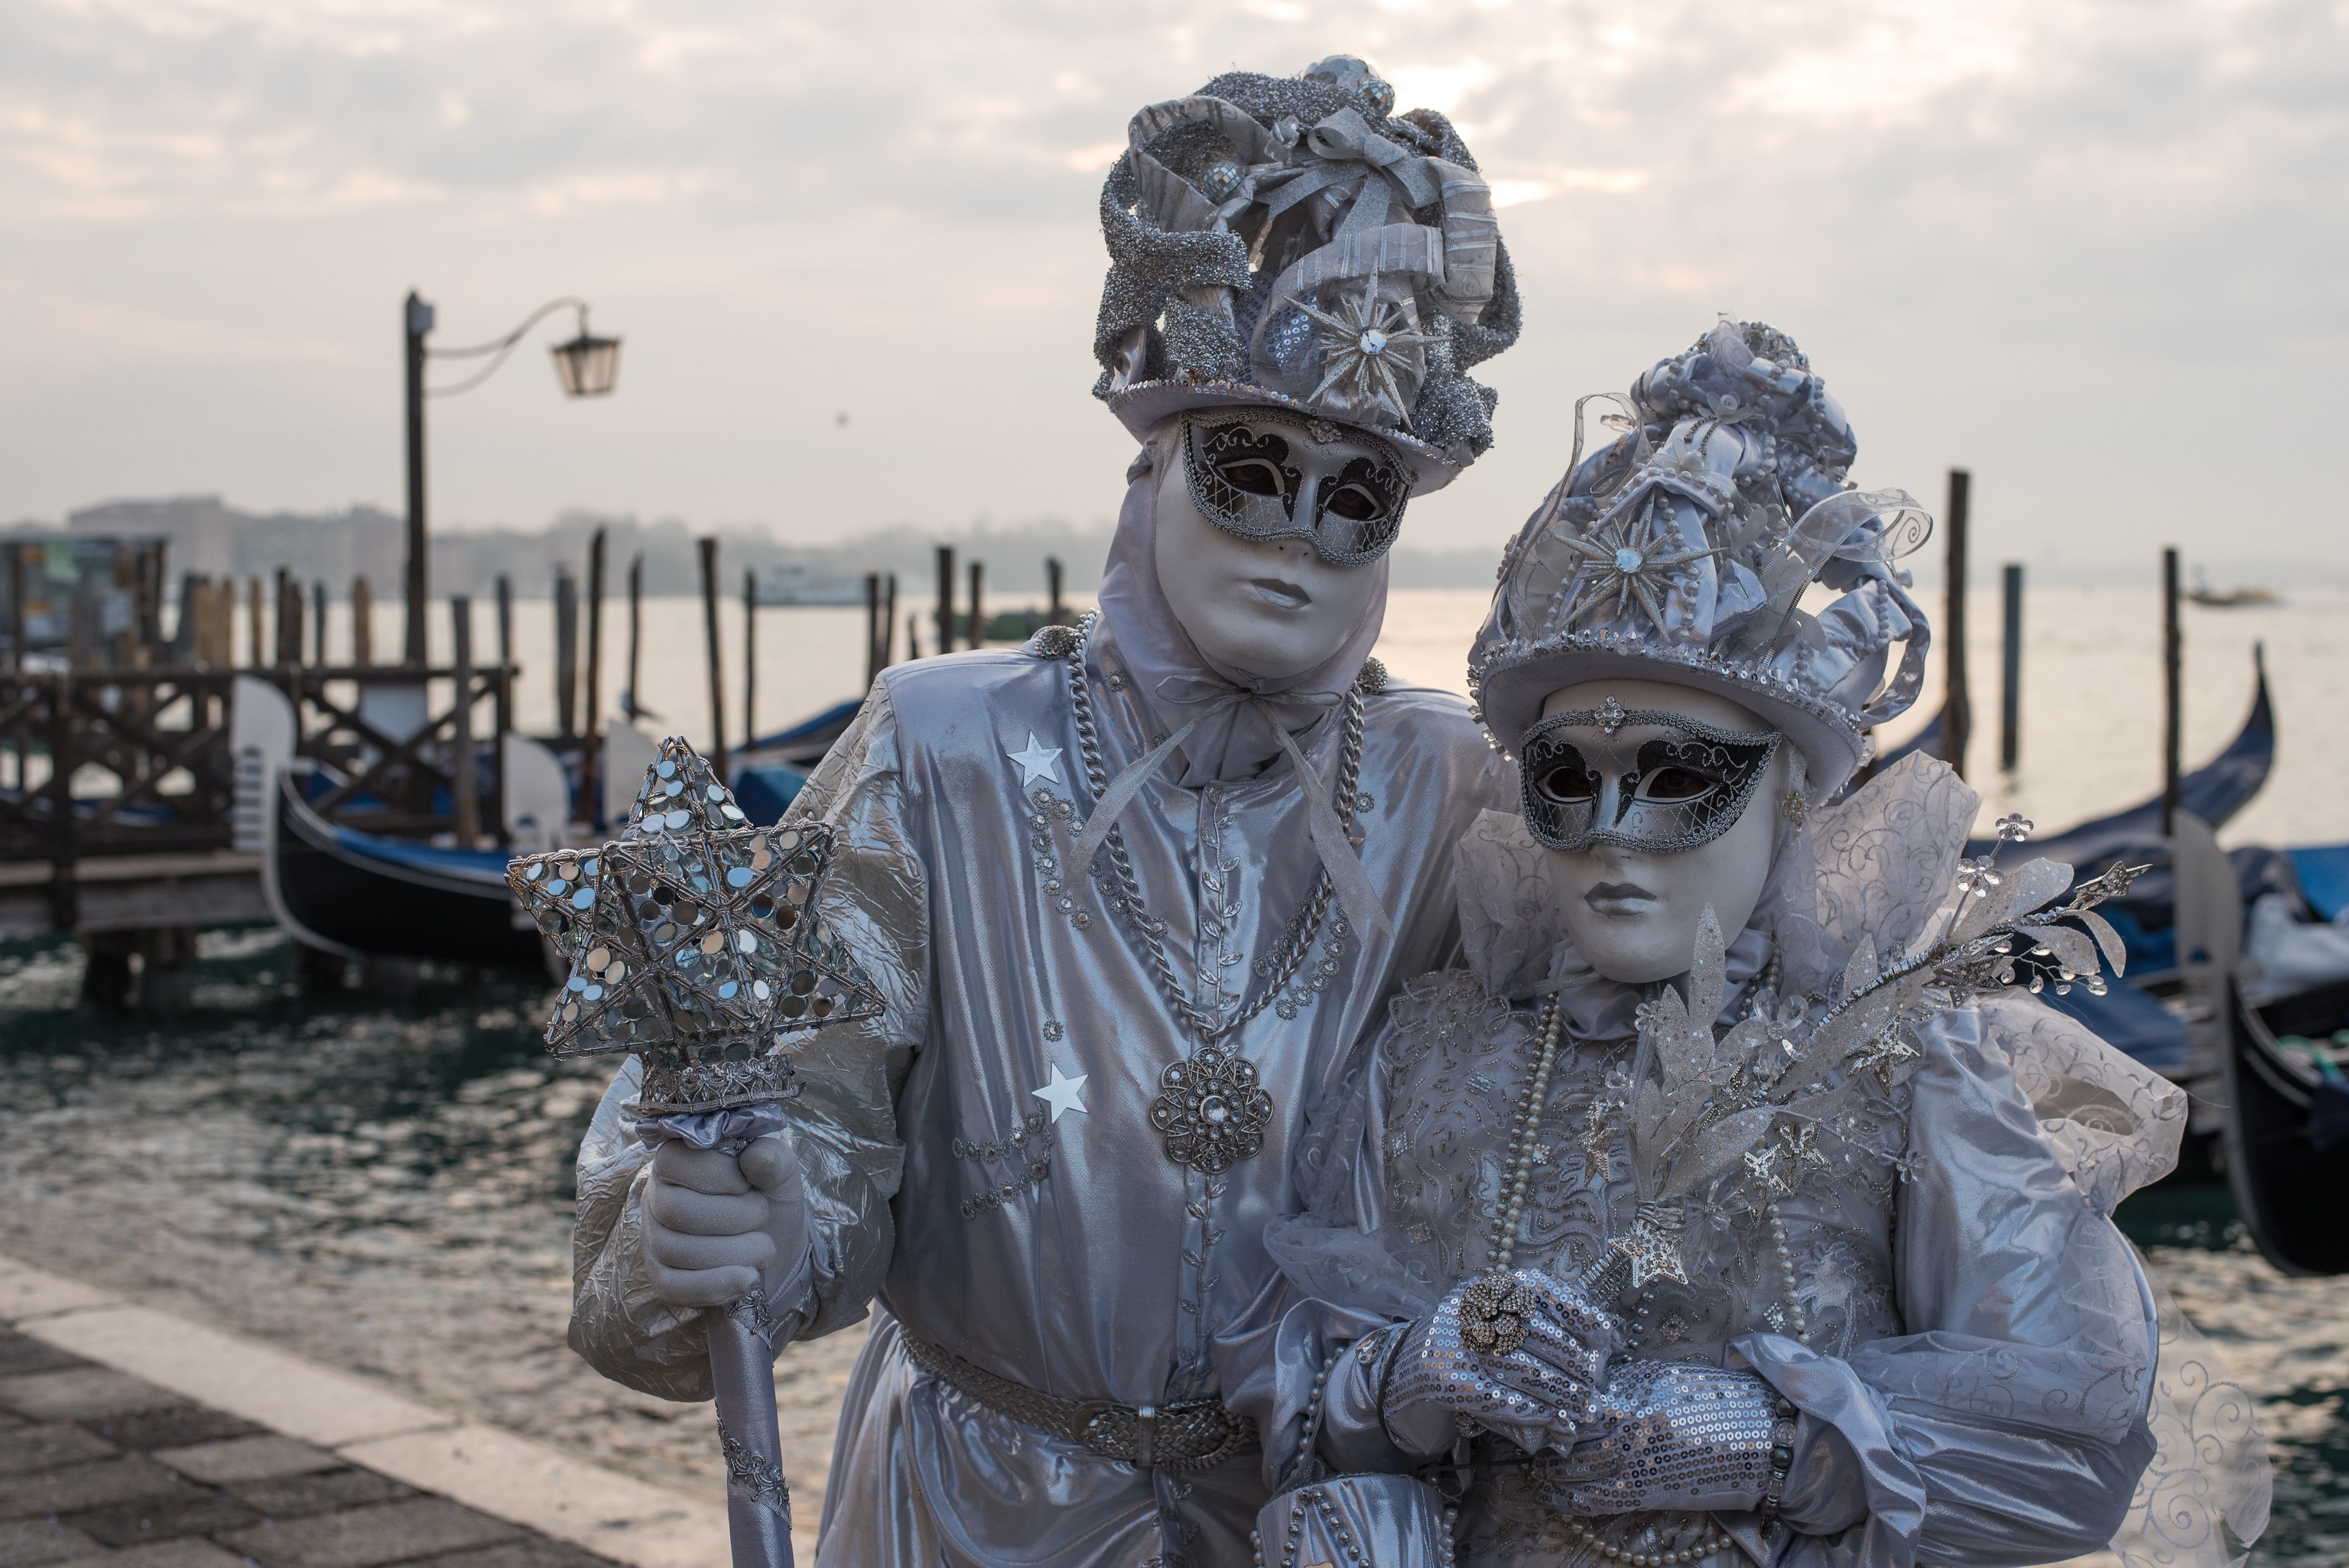 photography, carnival of venice, carnival, costume, italy, venice for android